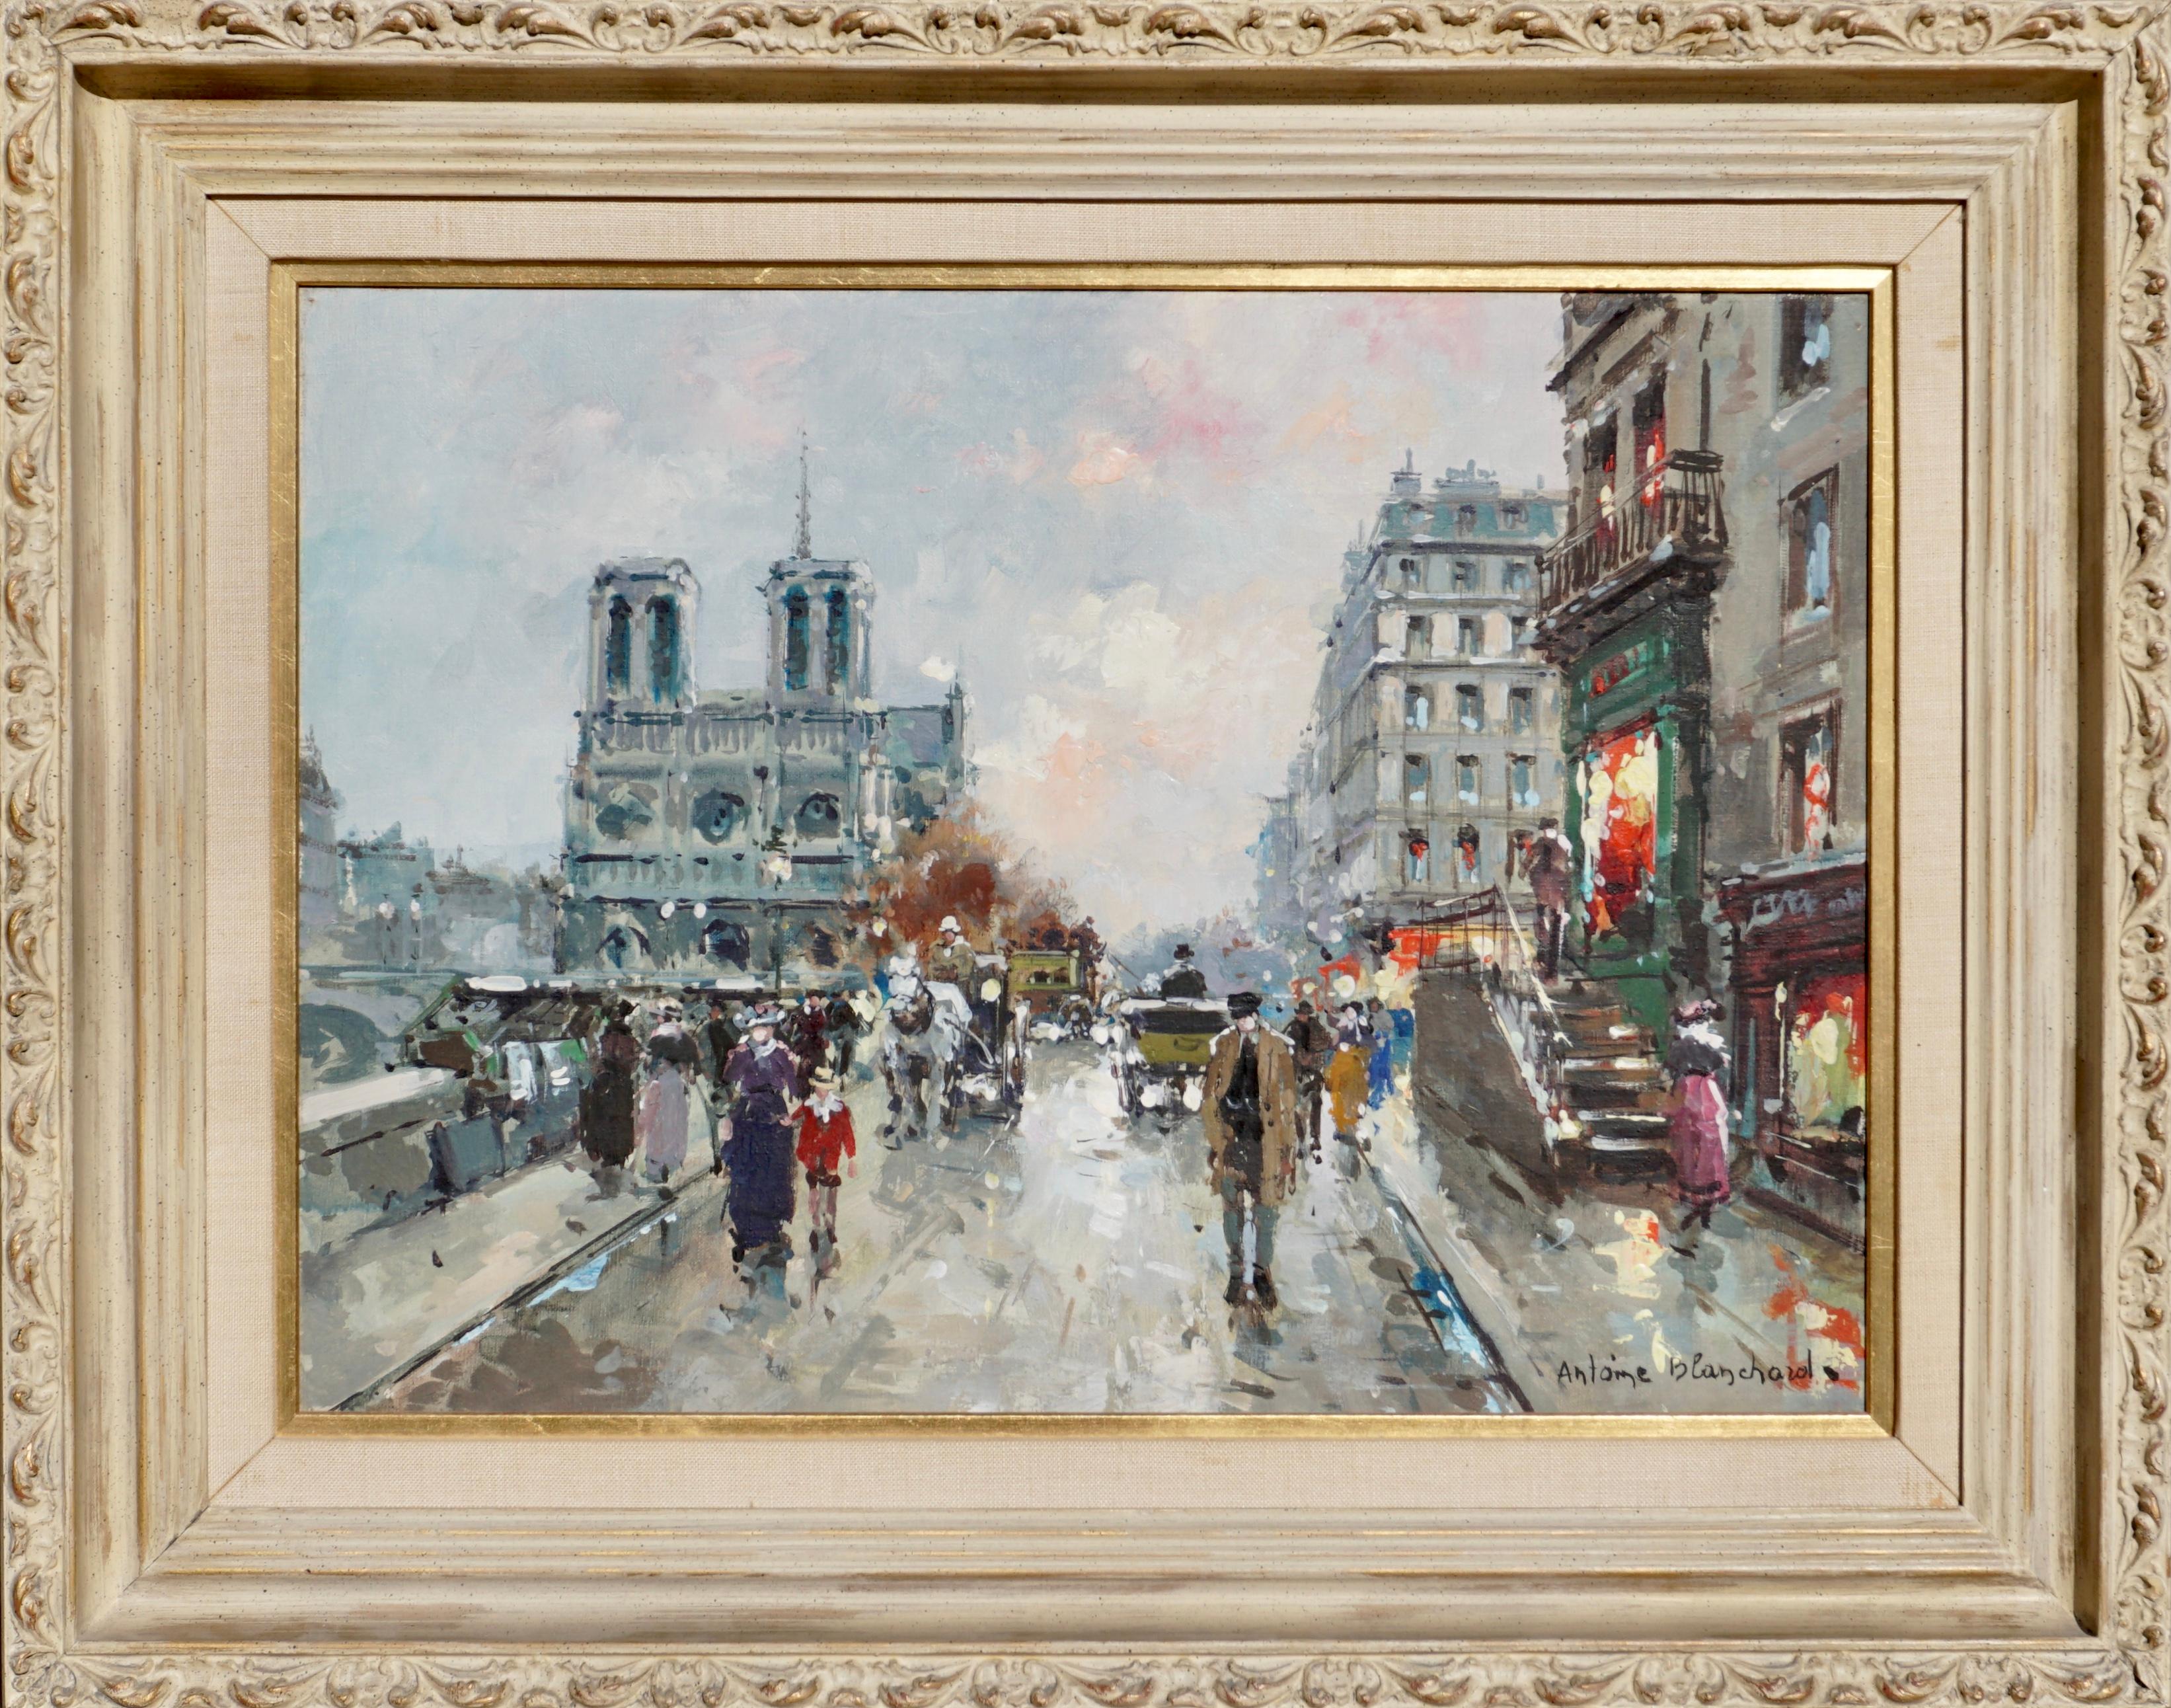 Antoine Blanchard (French, 1910-1988)
Notre Dame, Quai St. Michel
Oil on canvas board
Work: 13 x 18 inches (33.0 x 45.7 cm)
Framed Dimensions 19.25 X 24.25 X 2 Inches 

Signed lower right: Antoine Blanchard.

Provenance: Private collection, New